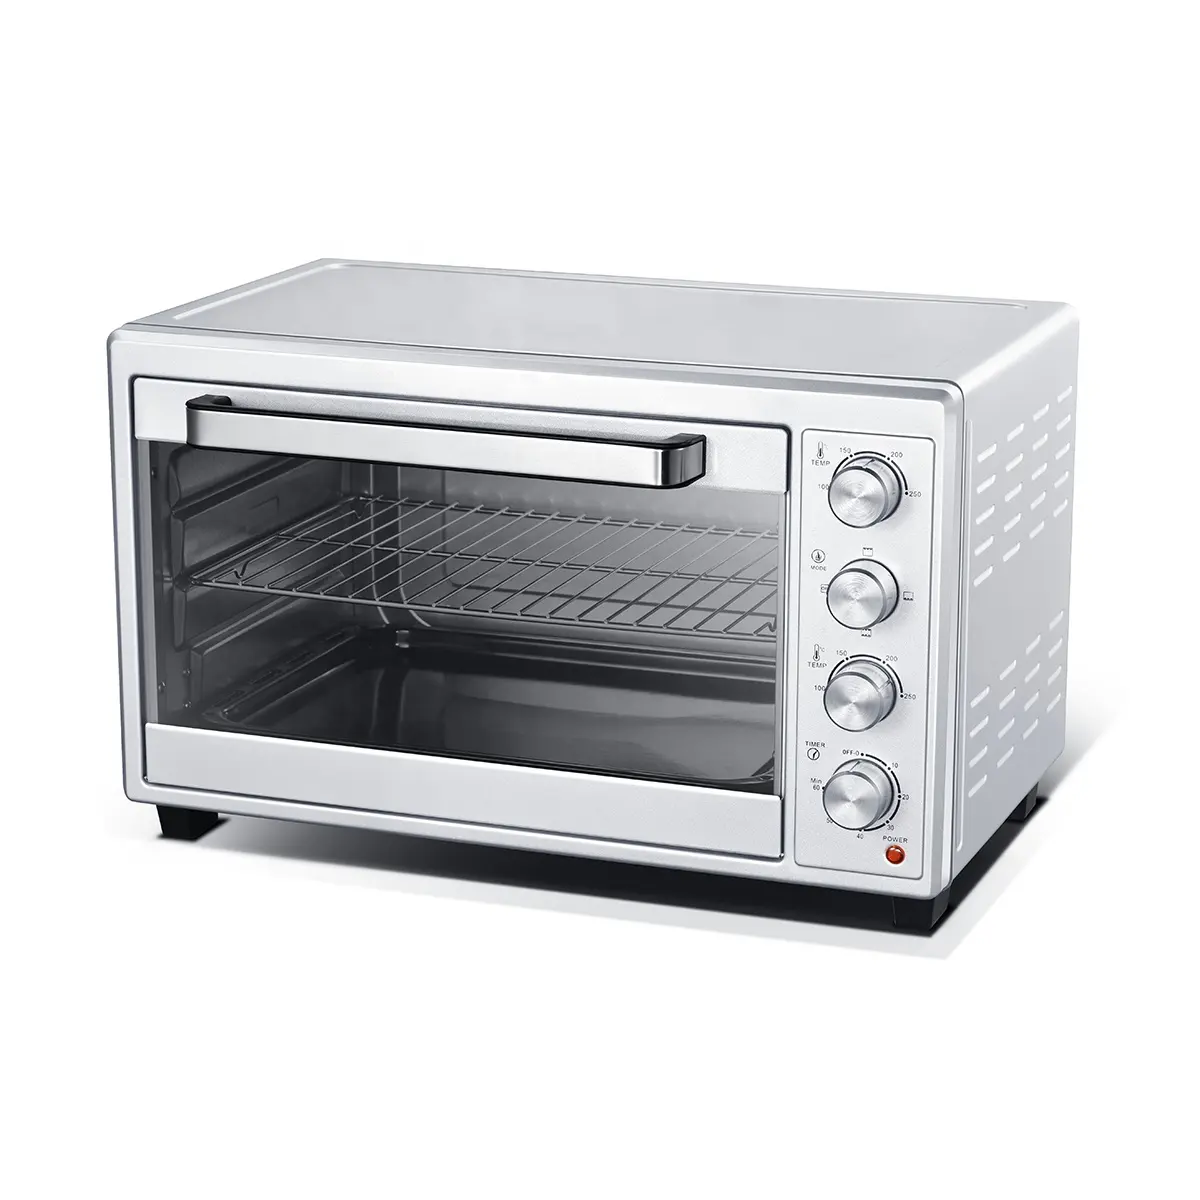 1800W 45L Pizza Oven for Home, Stainless Steel Toaster Oven for Baking